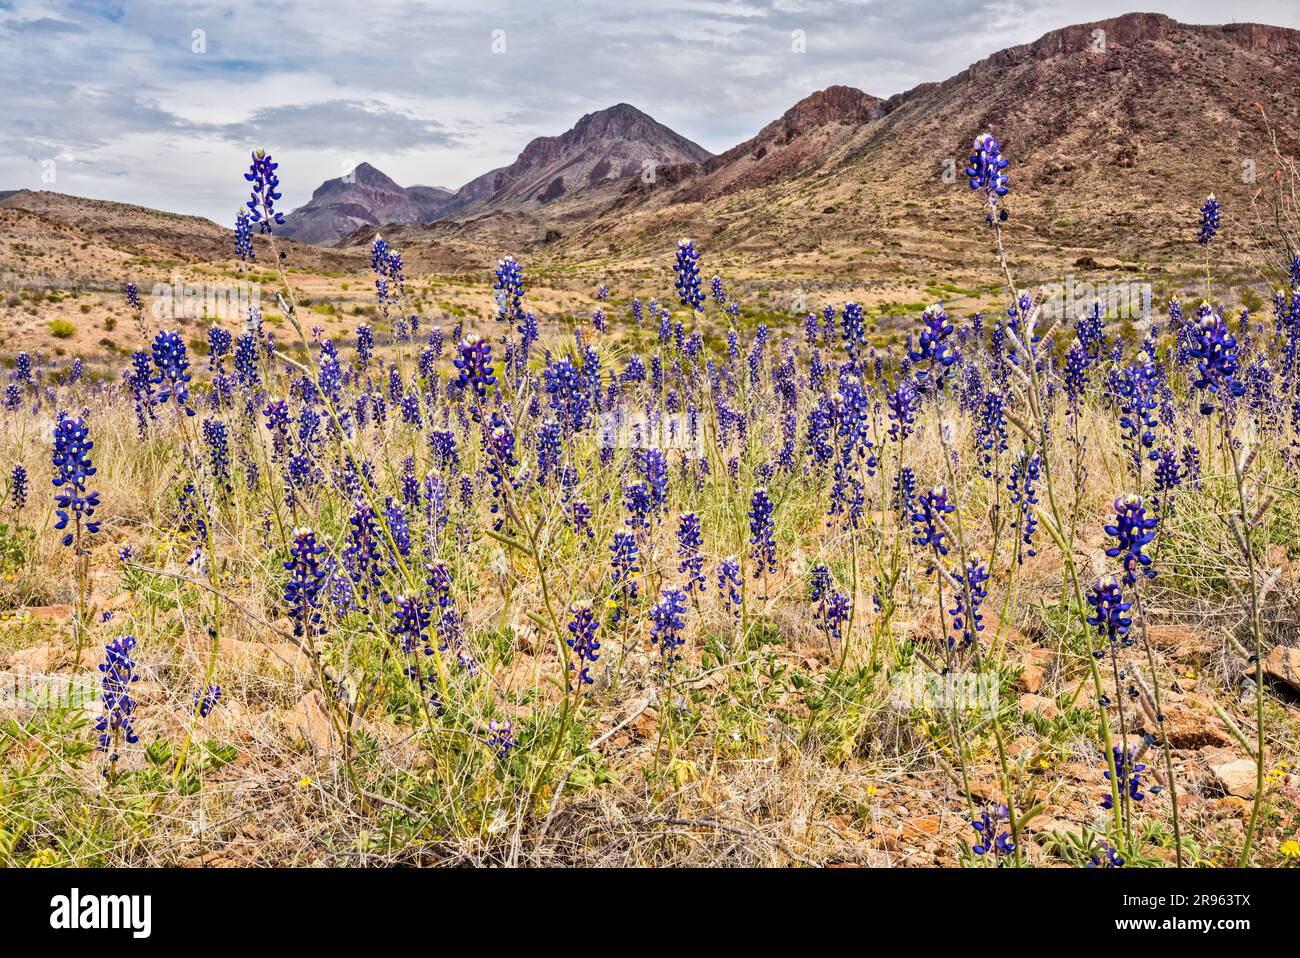 Bluebonnets in fiore a marzo, Ross Maxwell Scenic Drive, Chihuahuan Desert, Big Bend National Park, Texas, USA Foto Stock